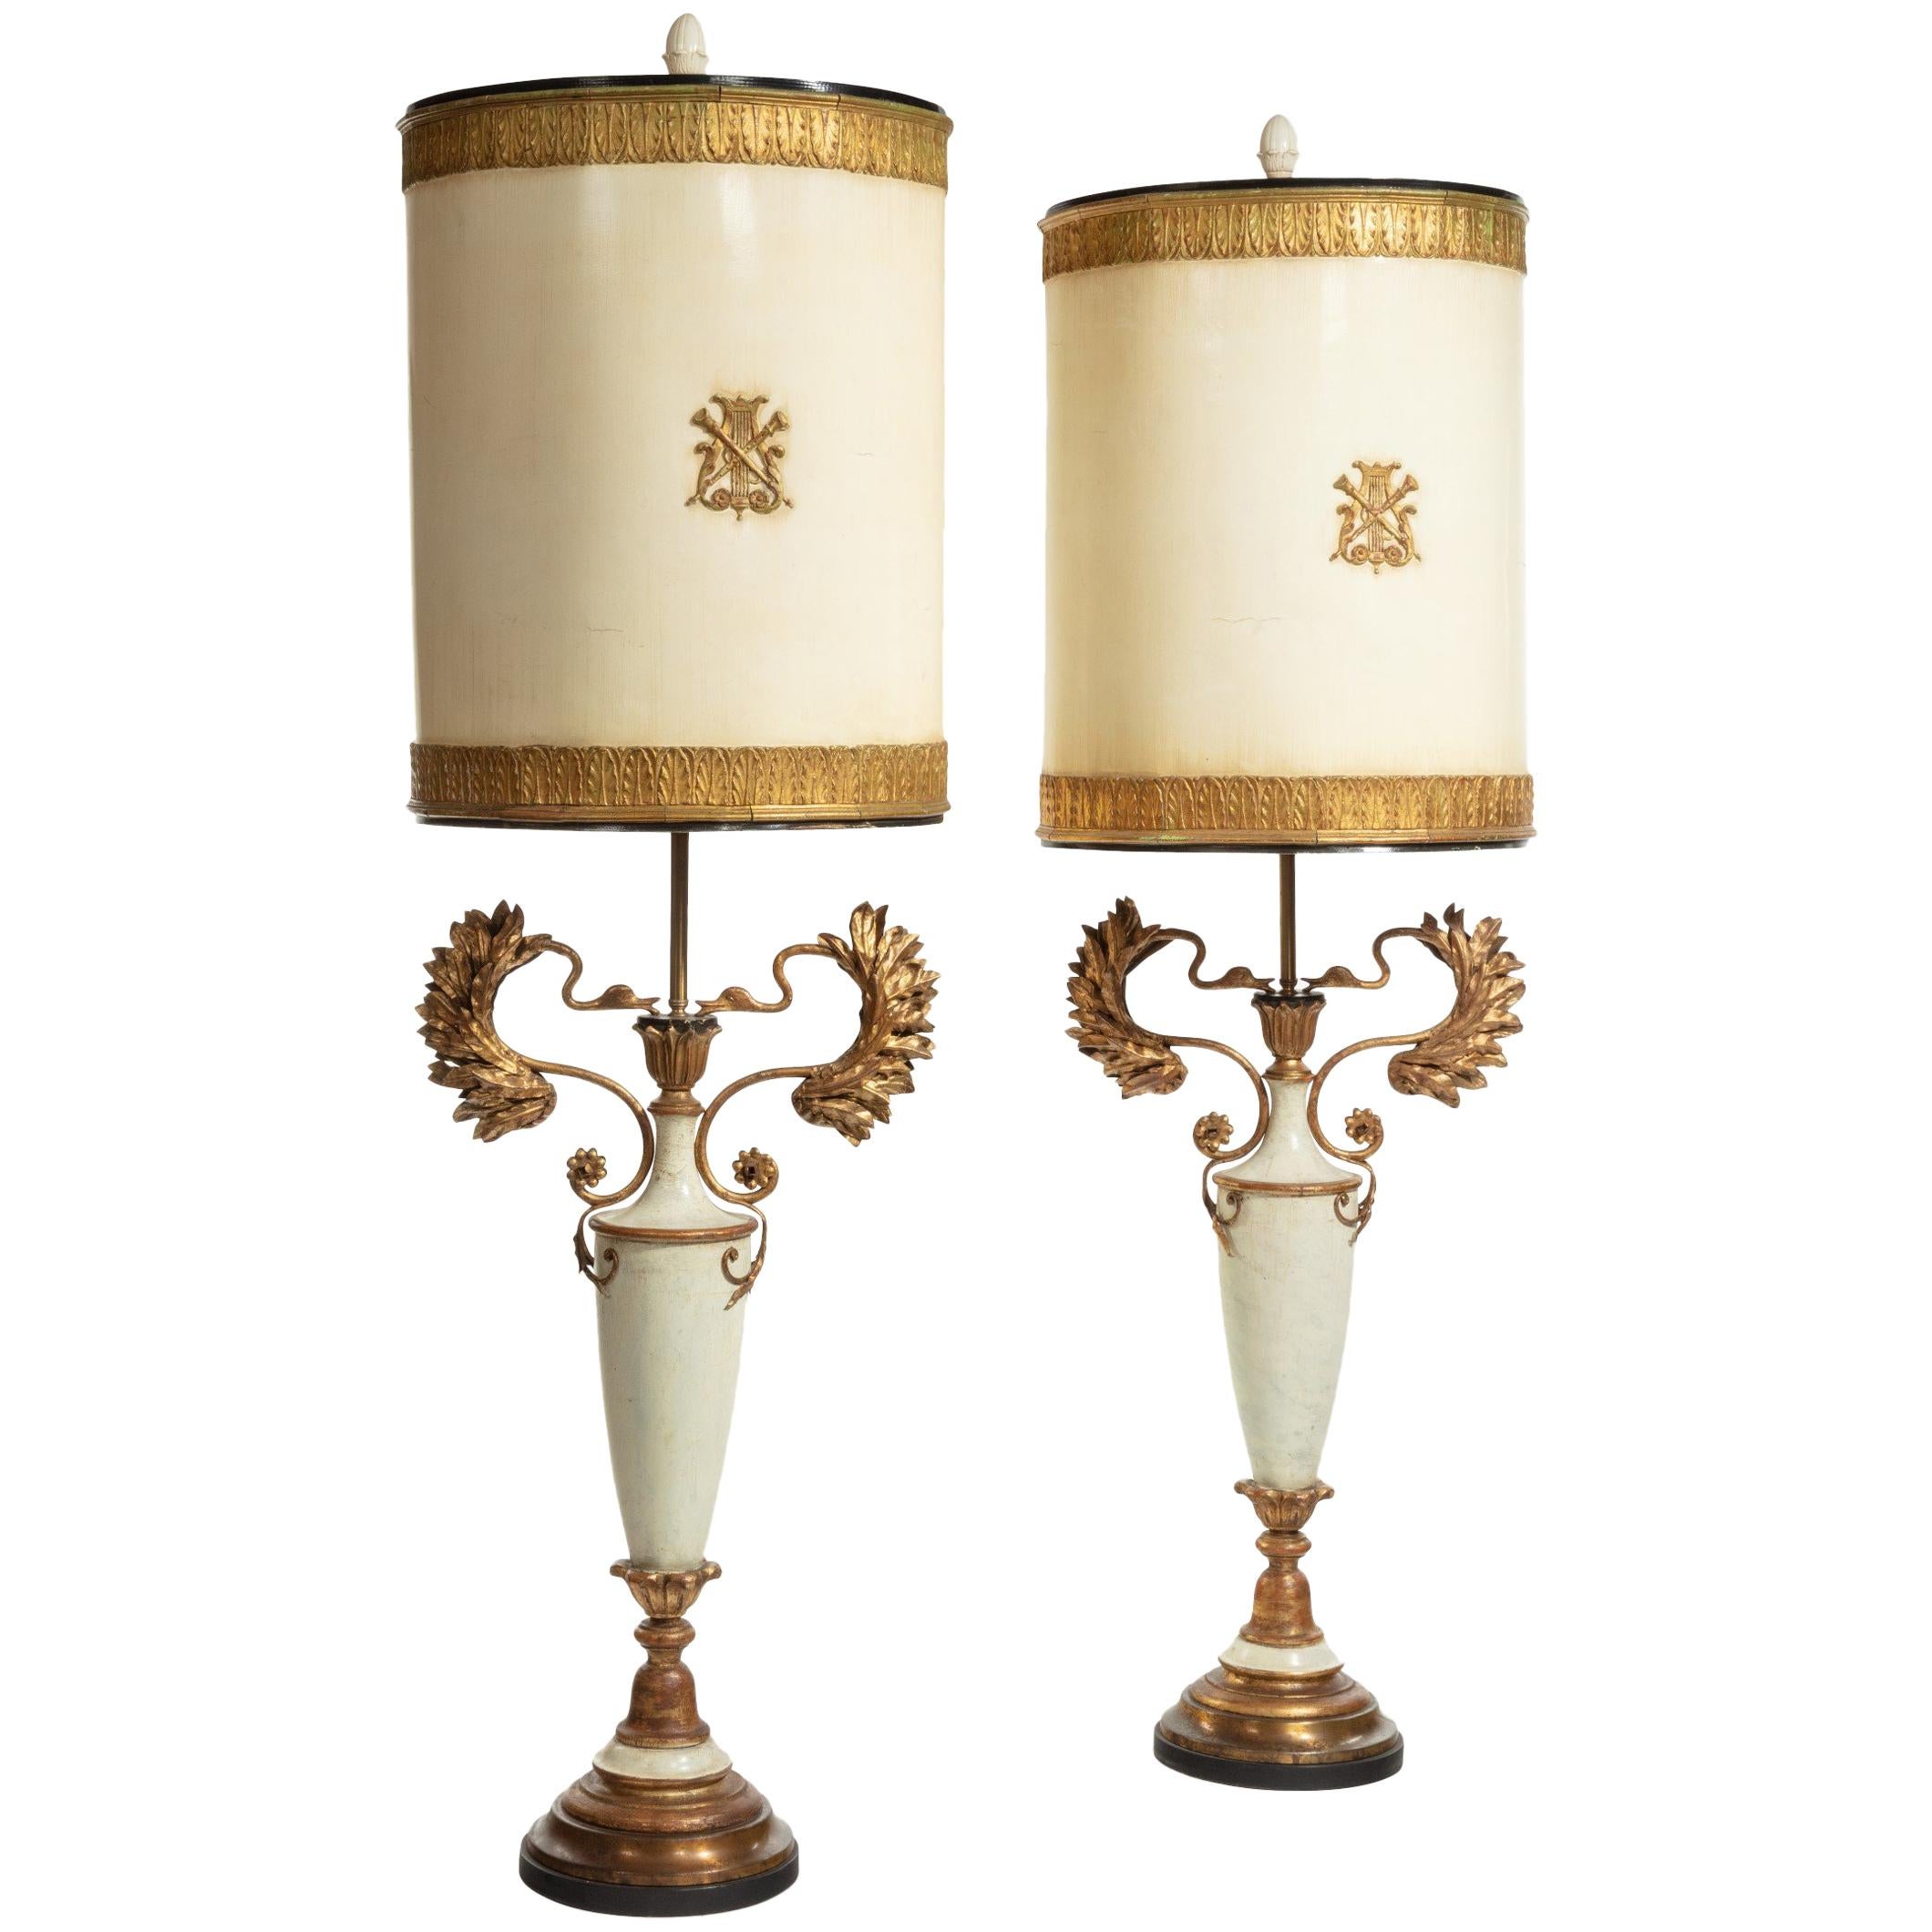 Large Decorative Pair of French Painted and Gilt Floor Lamps